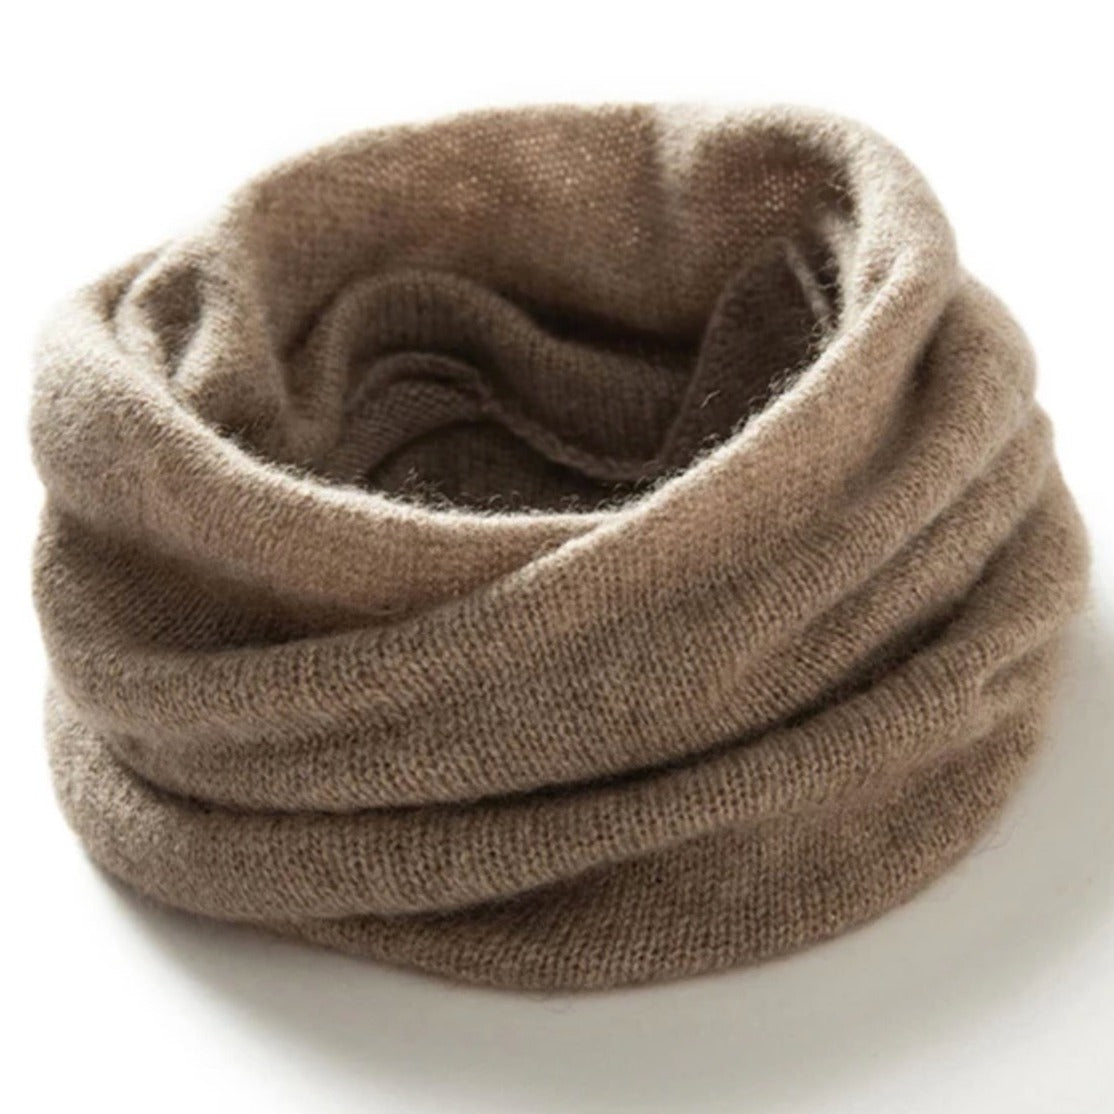 Taupe Natural 100% cashmere neck warmer, shop Canada cashmere clothes, scarves, shawls